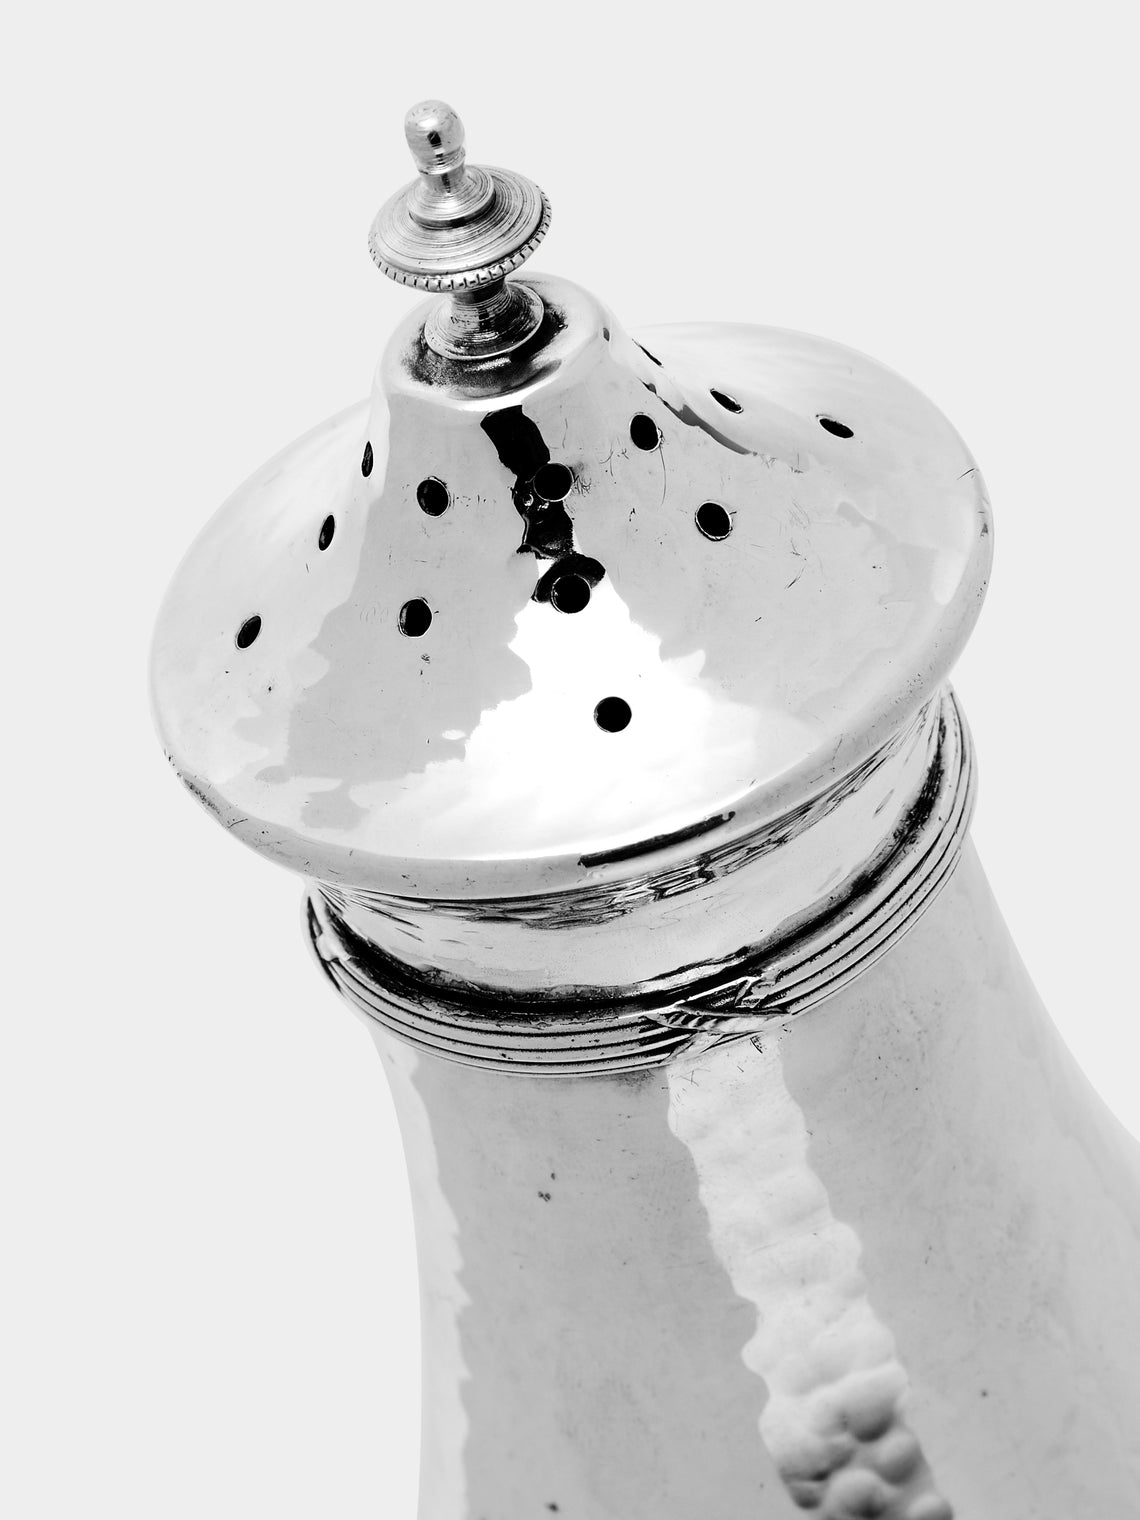 Antique and Vintage - 1900s Silver-Plated Sugar Shaker -  - ABASK